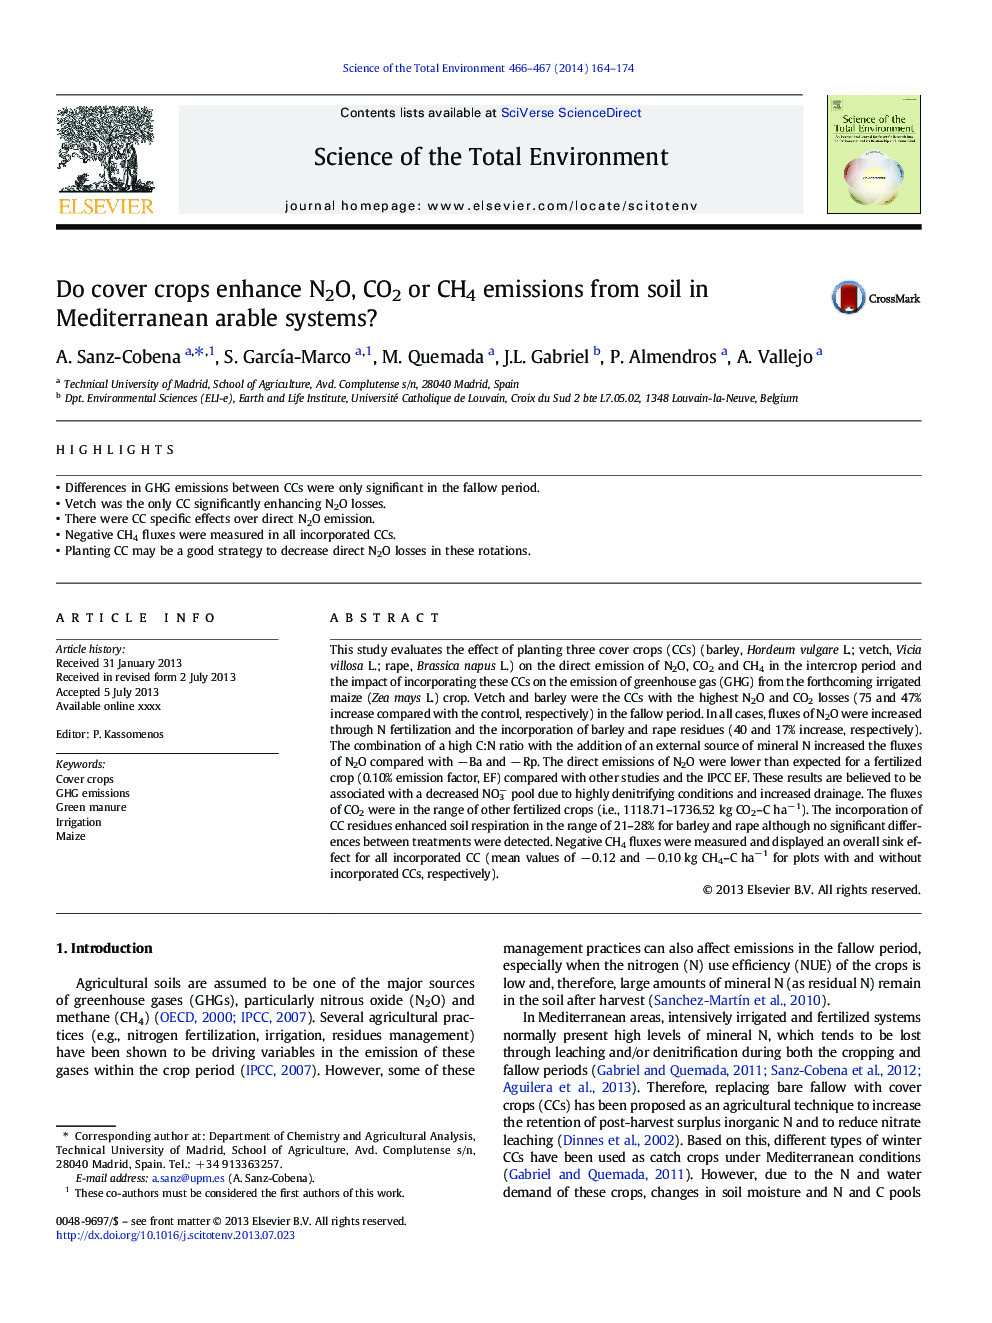 Do cover crops enhance N2O, CO2 or CH4 emissions from soil in Mediterranean arable systems?